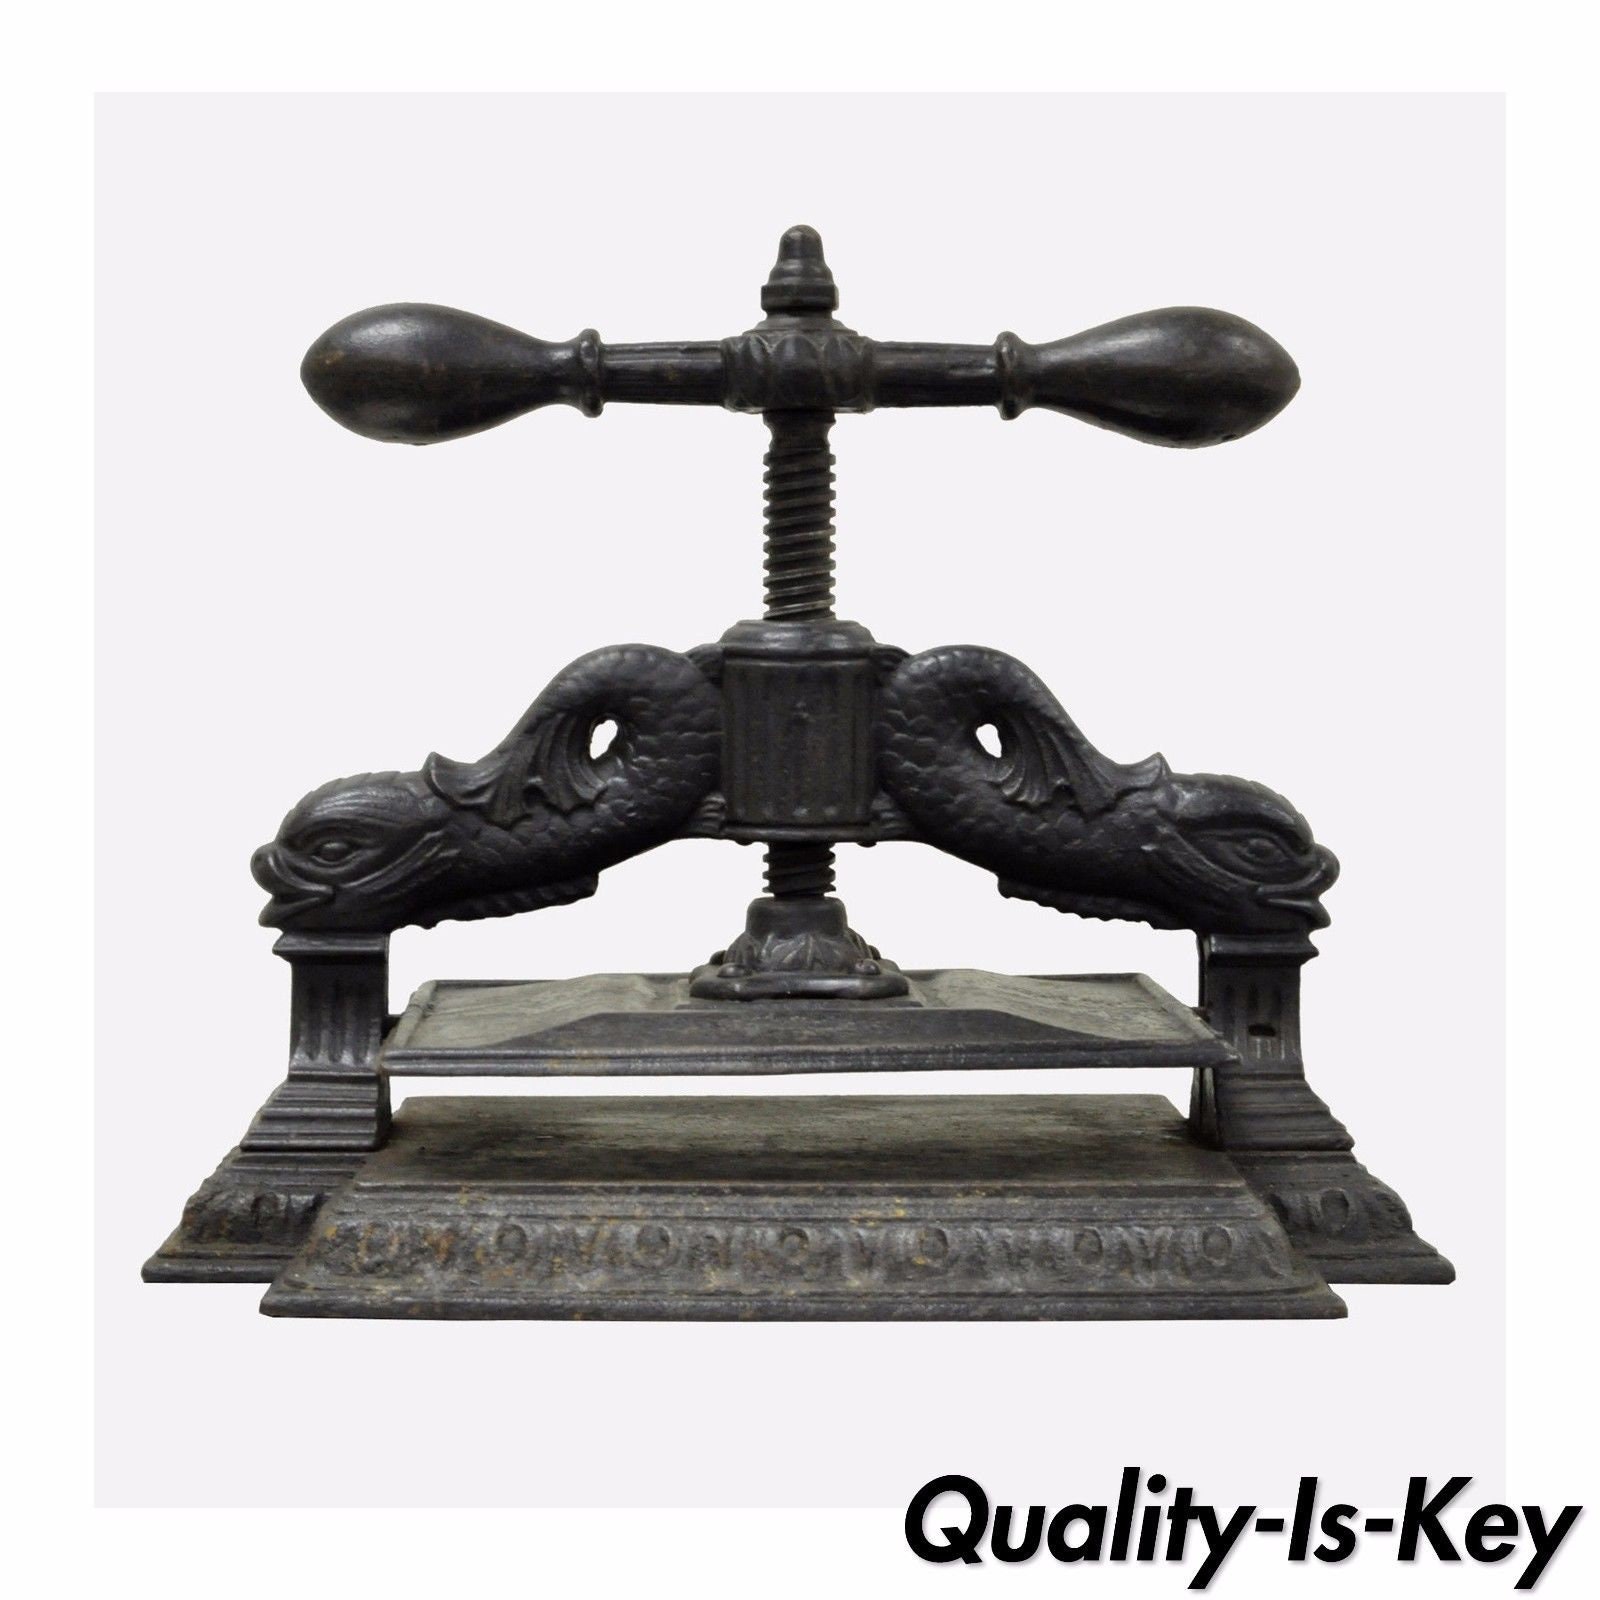 An oversized nineteenth century antique book press, mahogany and